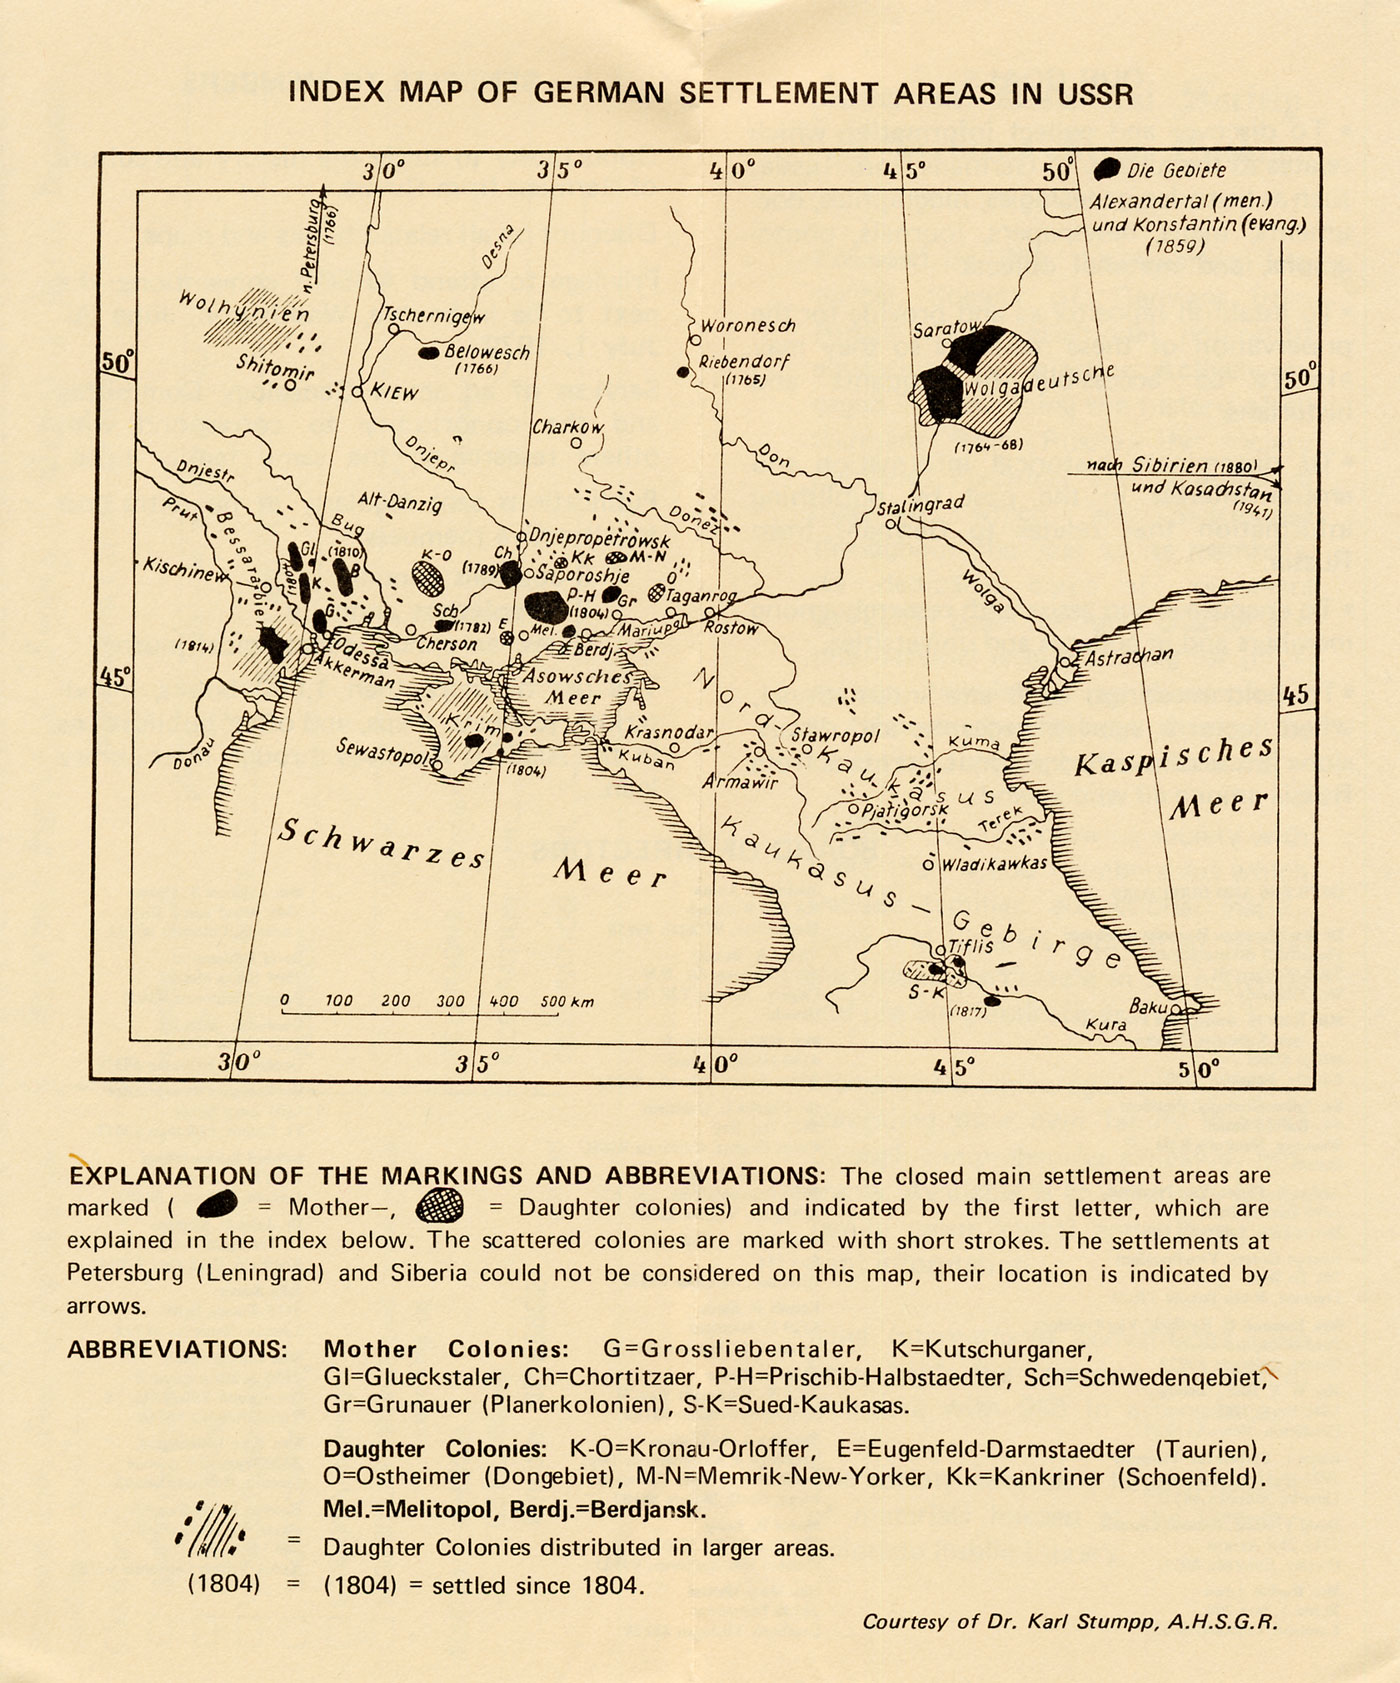 Map of German settlements in Russia by Karl Stumpp.